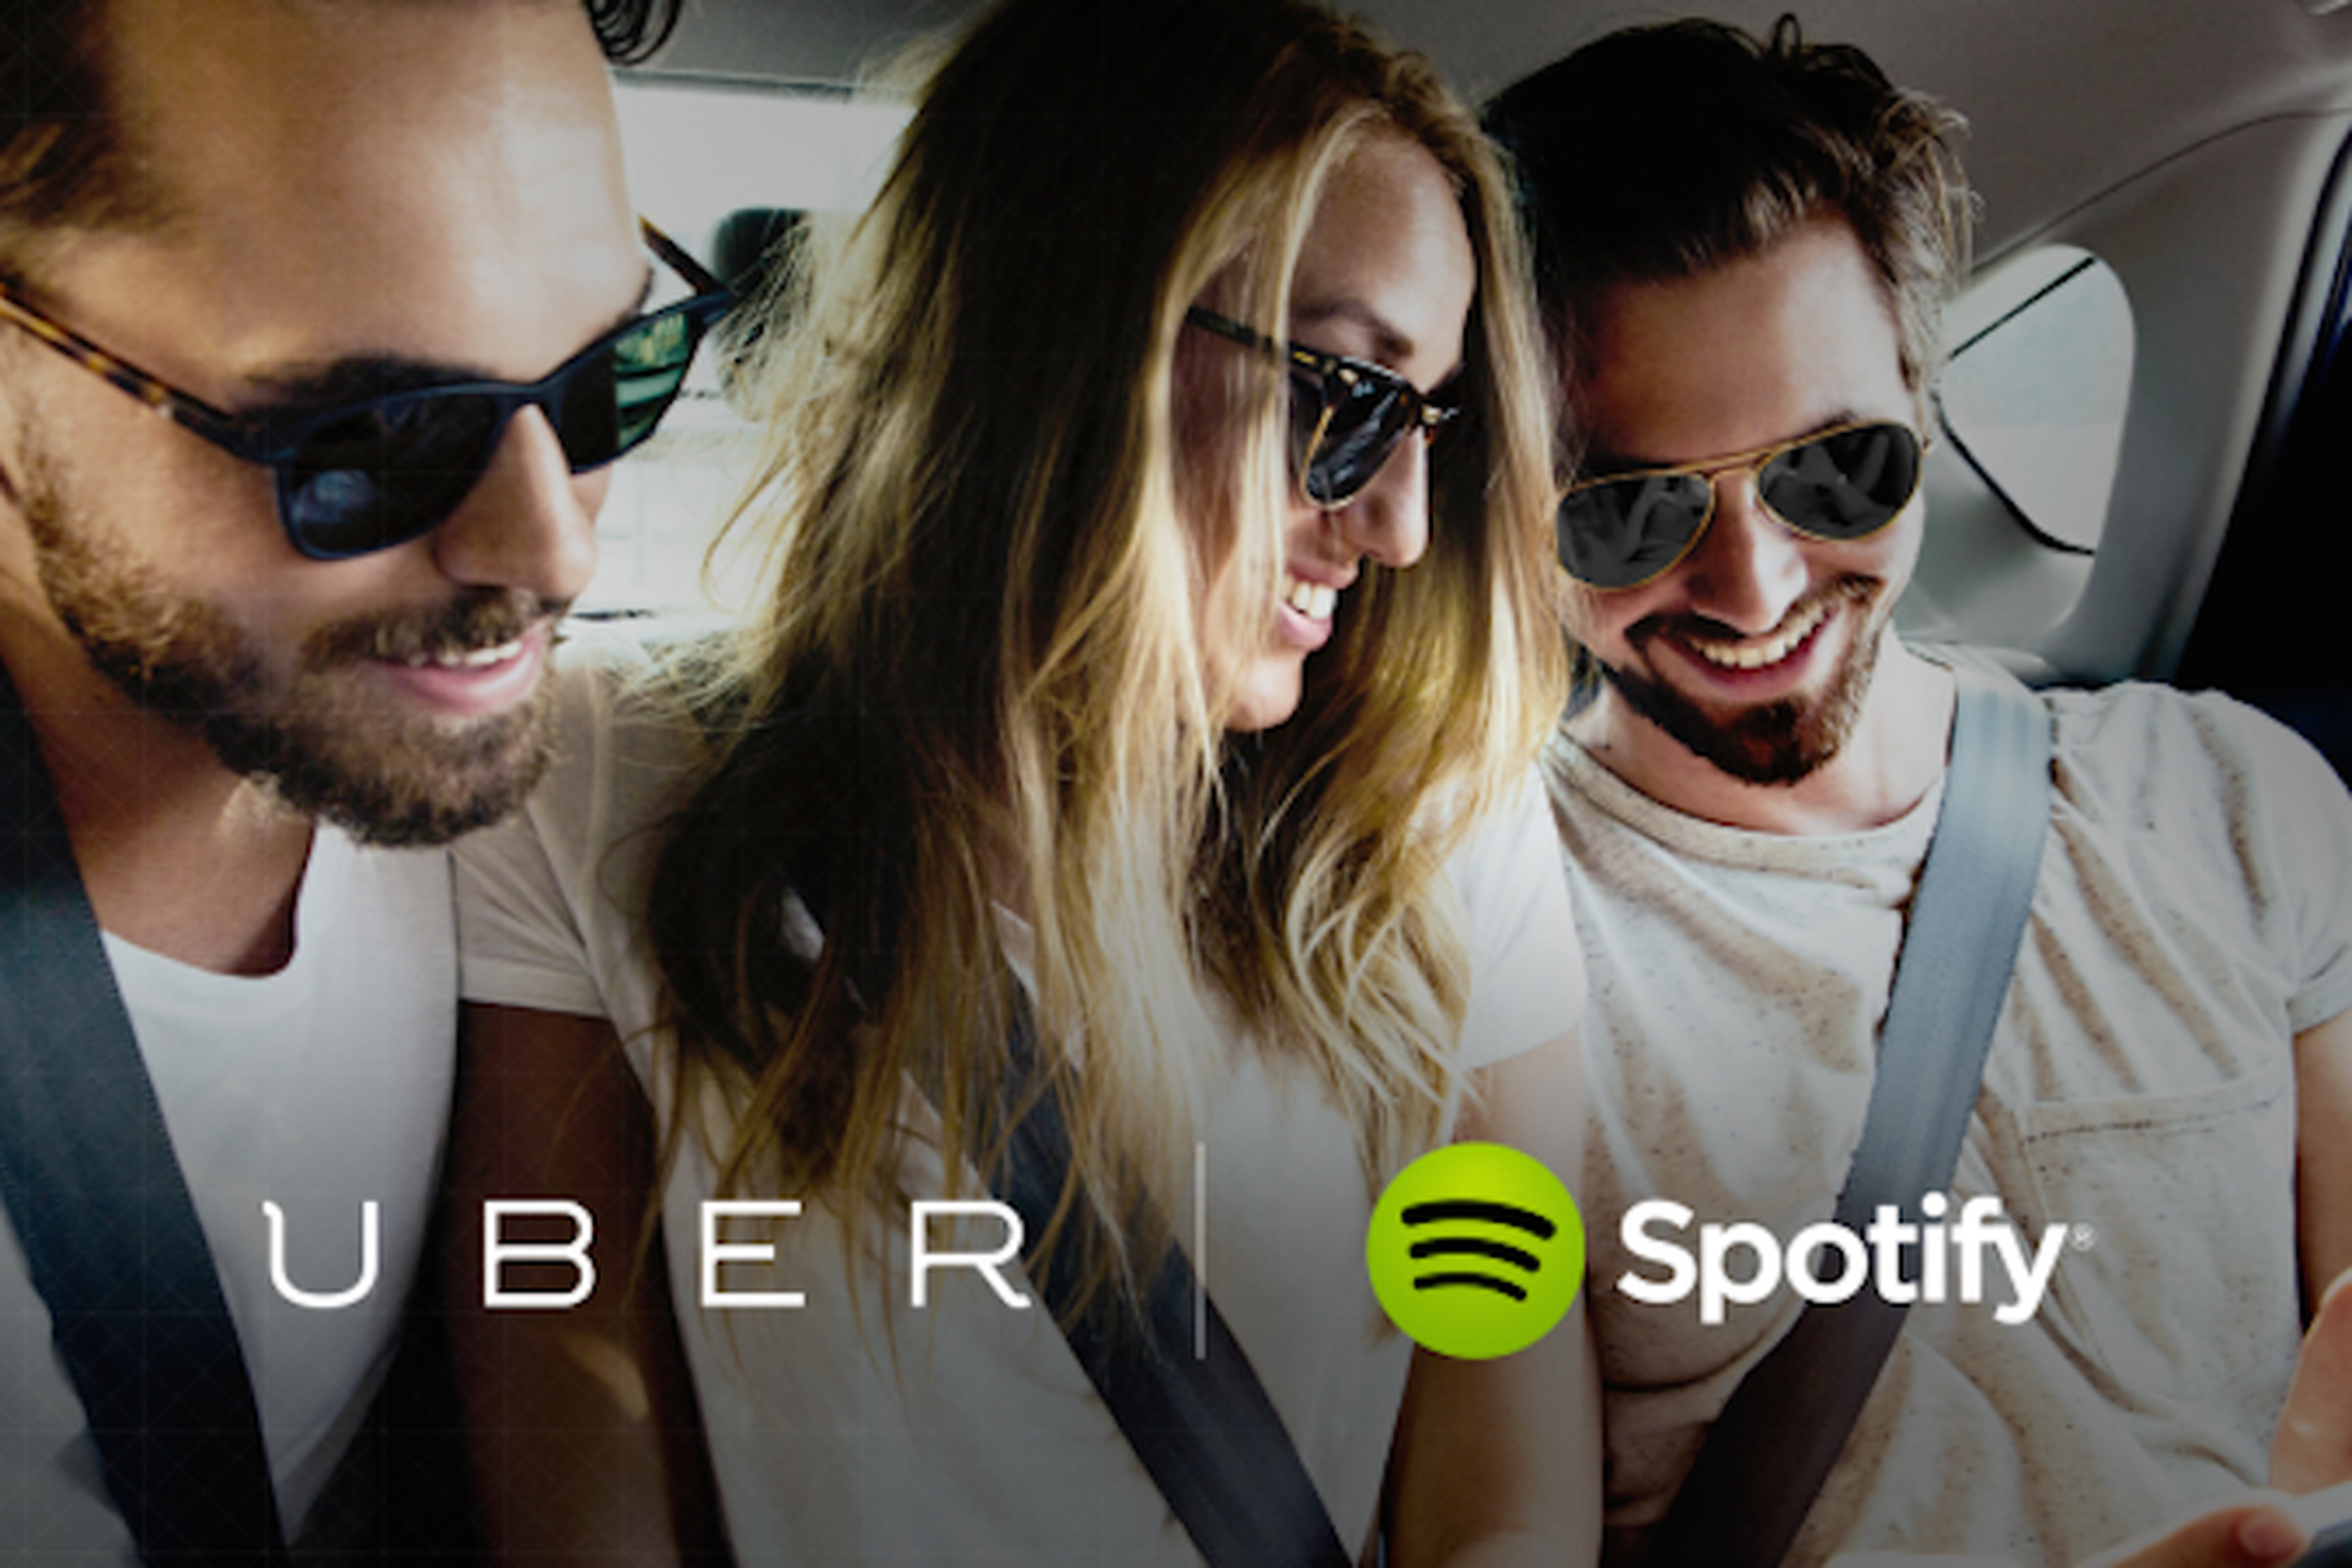 case study on uber and spotify alliance